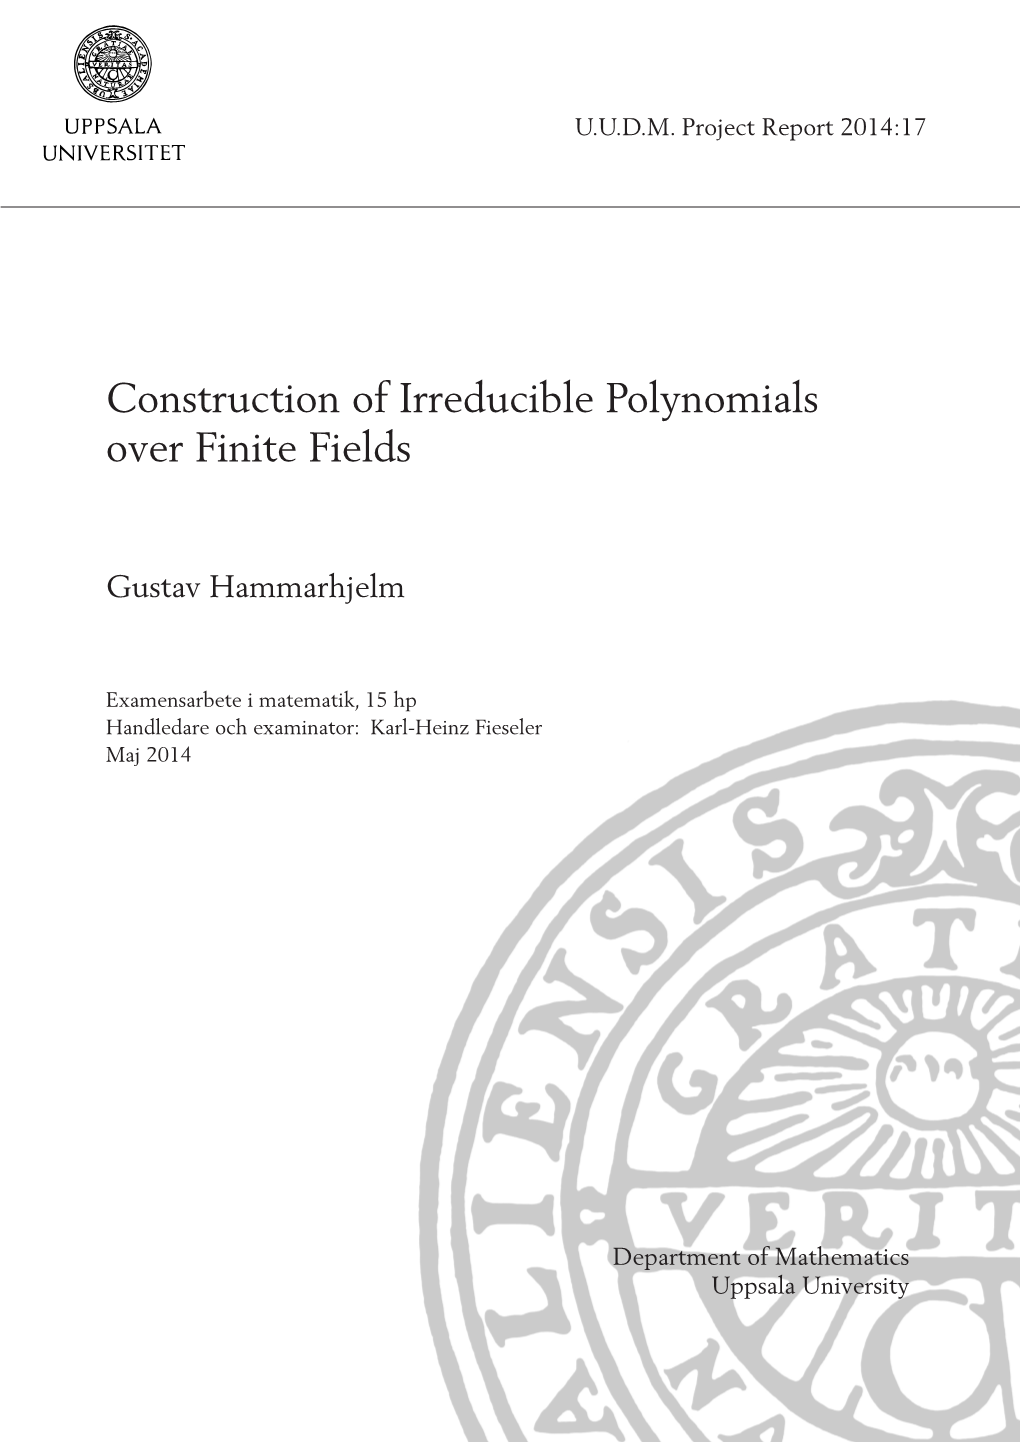 Construction of Irreducible Polynomials Over Finite Fields